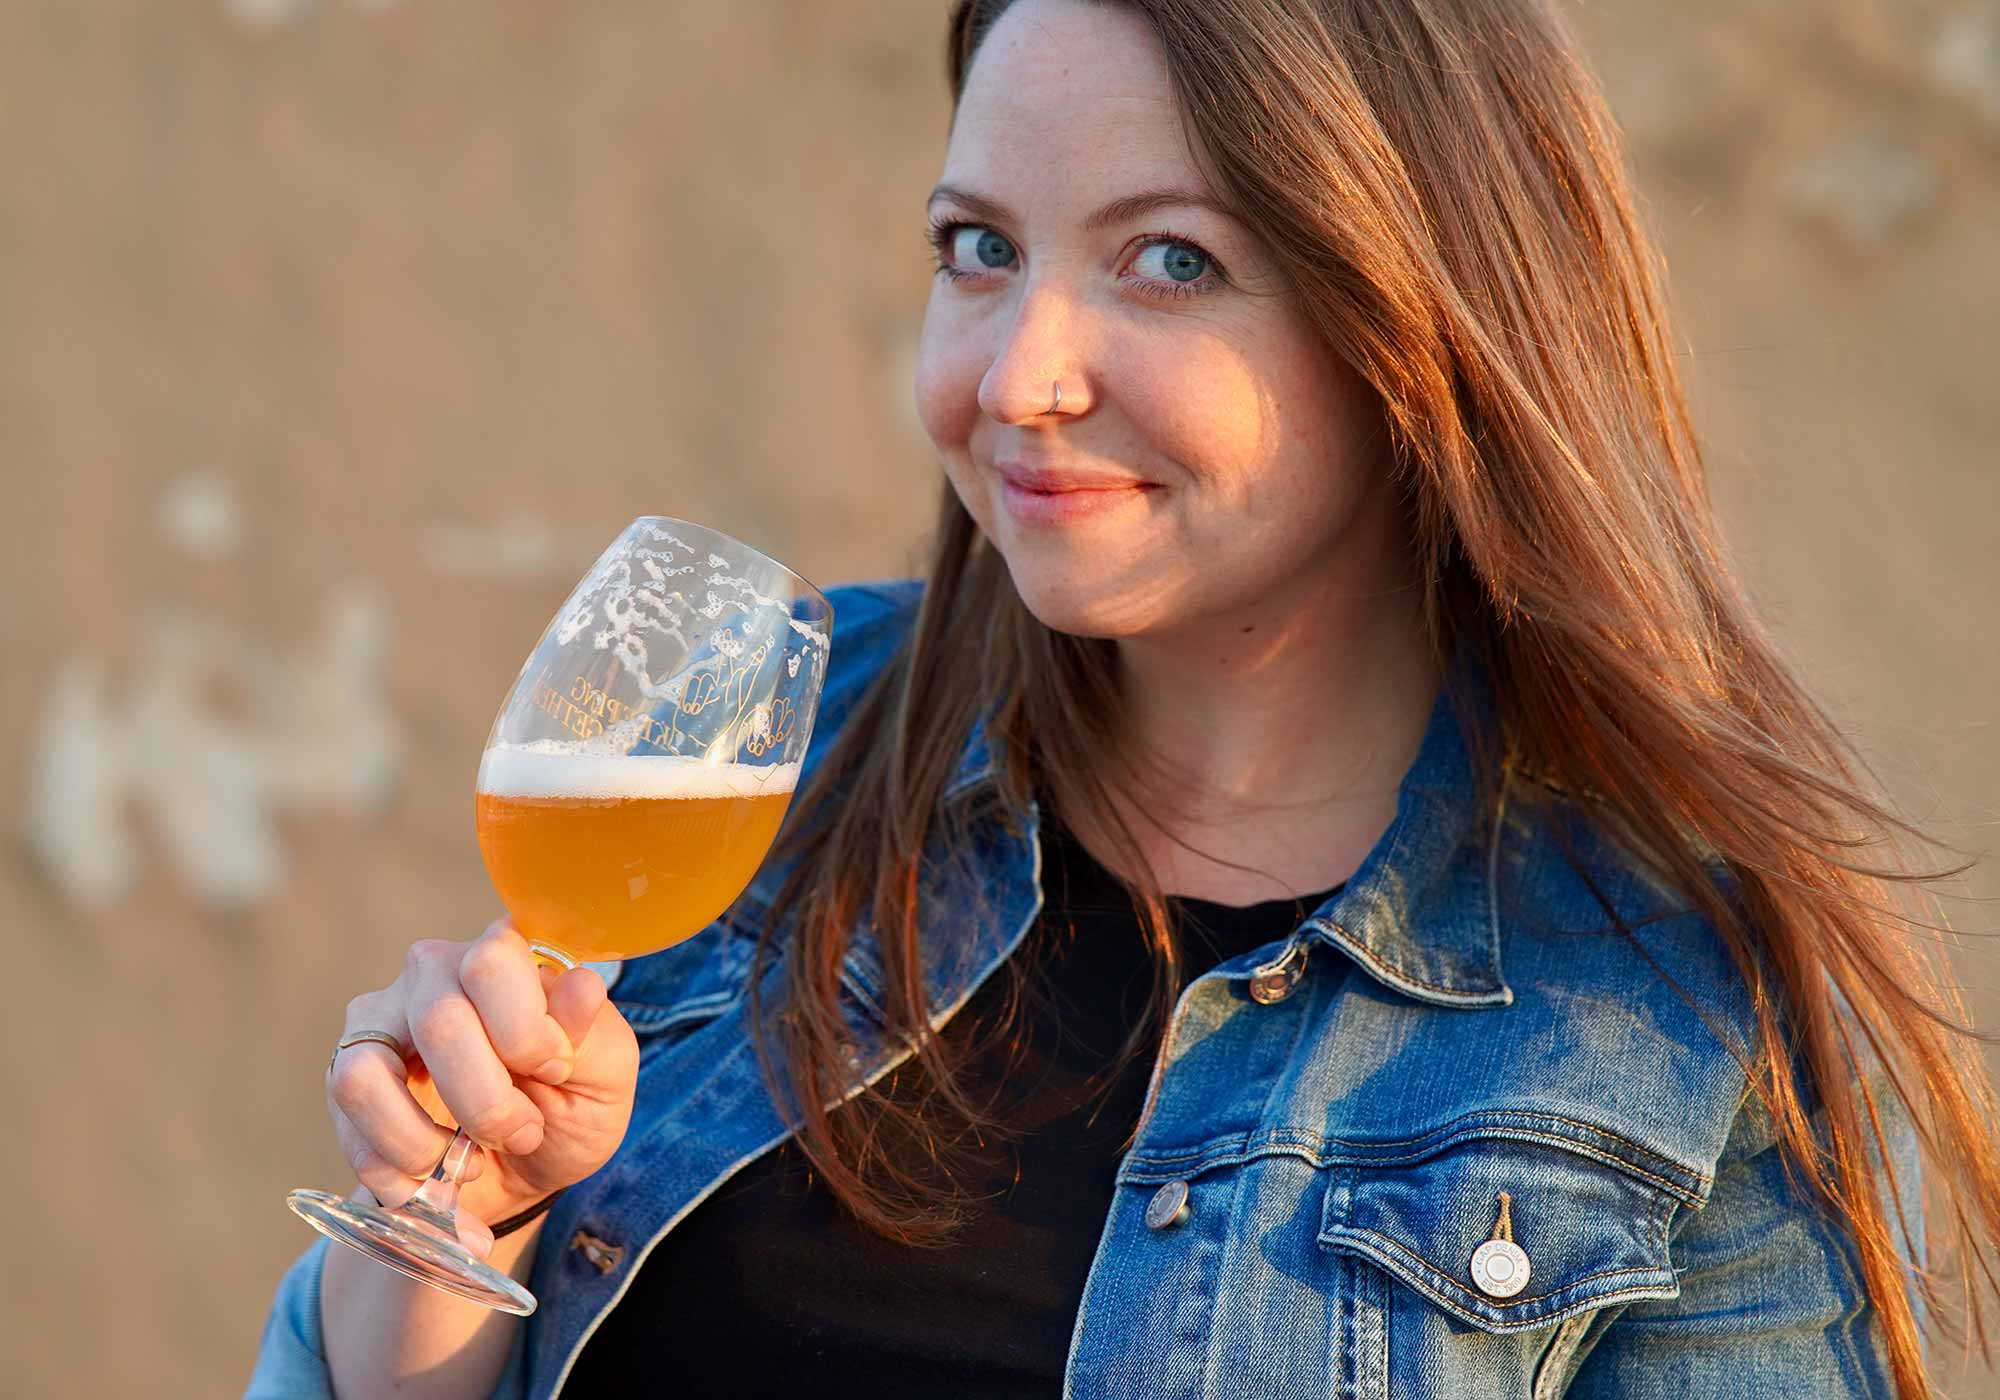 15 Questions with Averie Swanson, Founder of Keeping Together and Former Head Brewer at Jester King